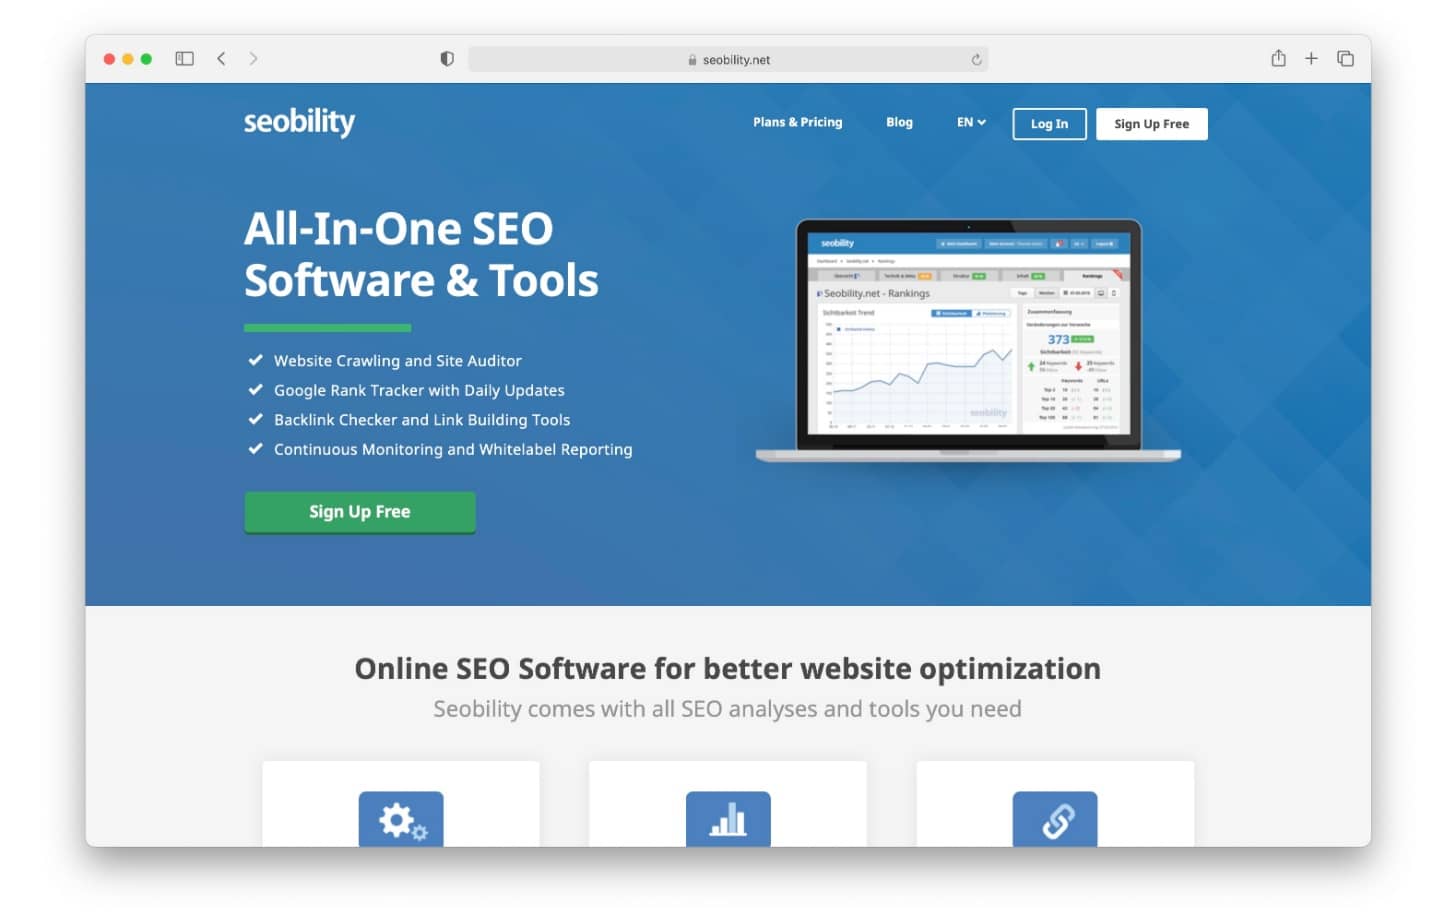 SEObility has a range of different SEO tools in one place